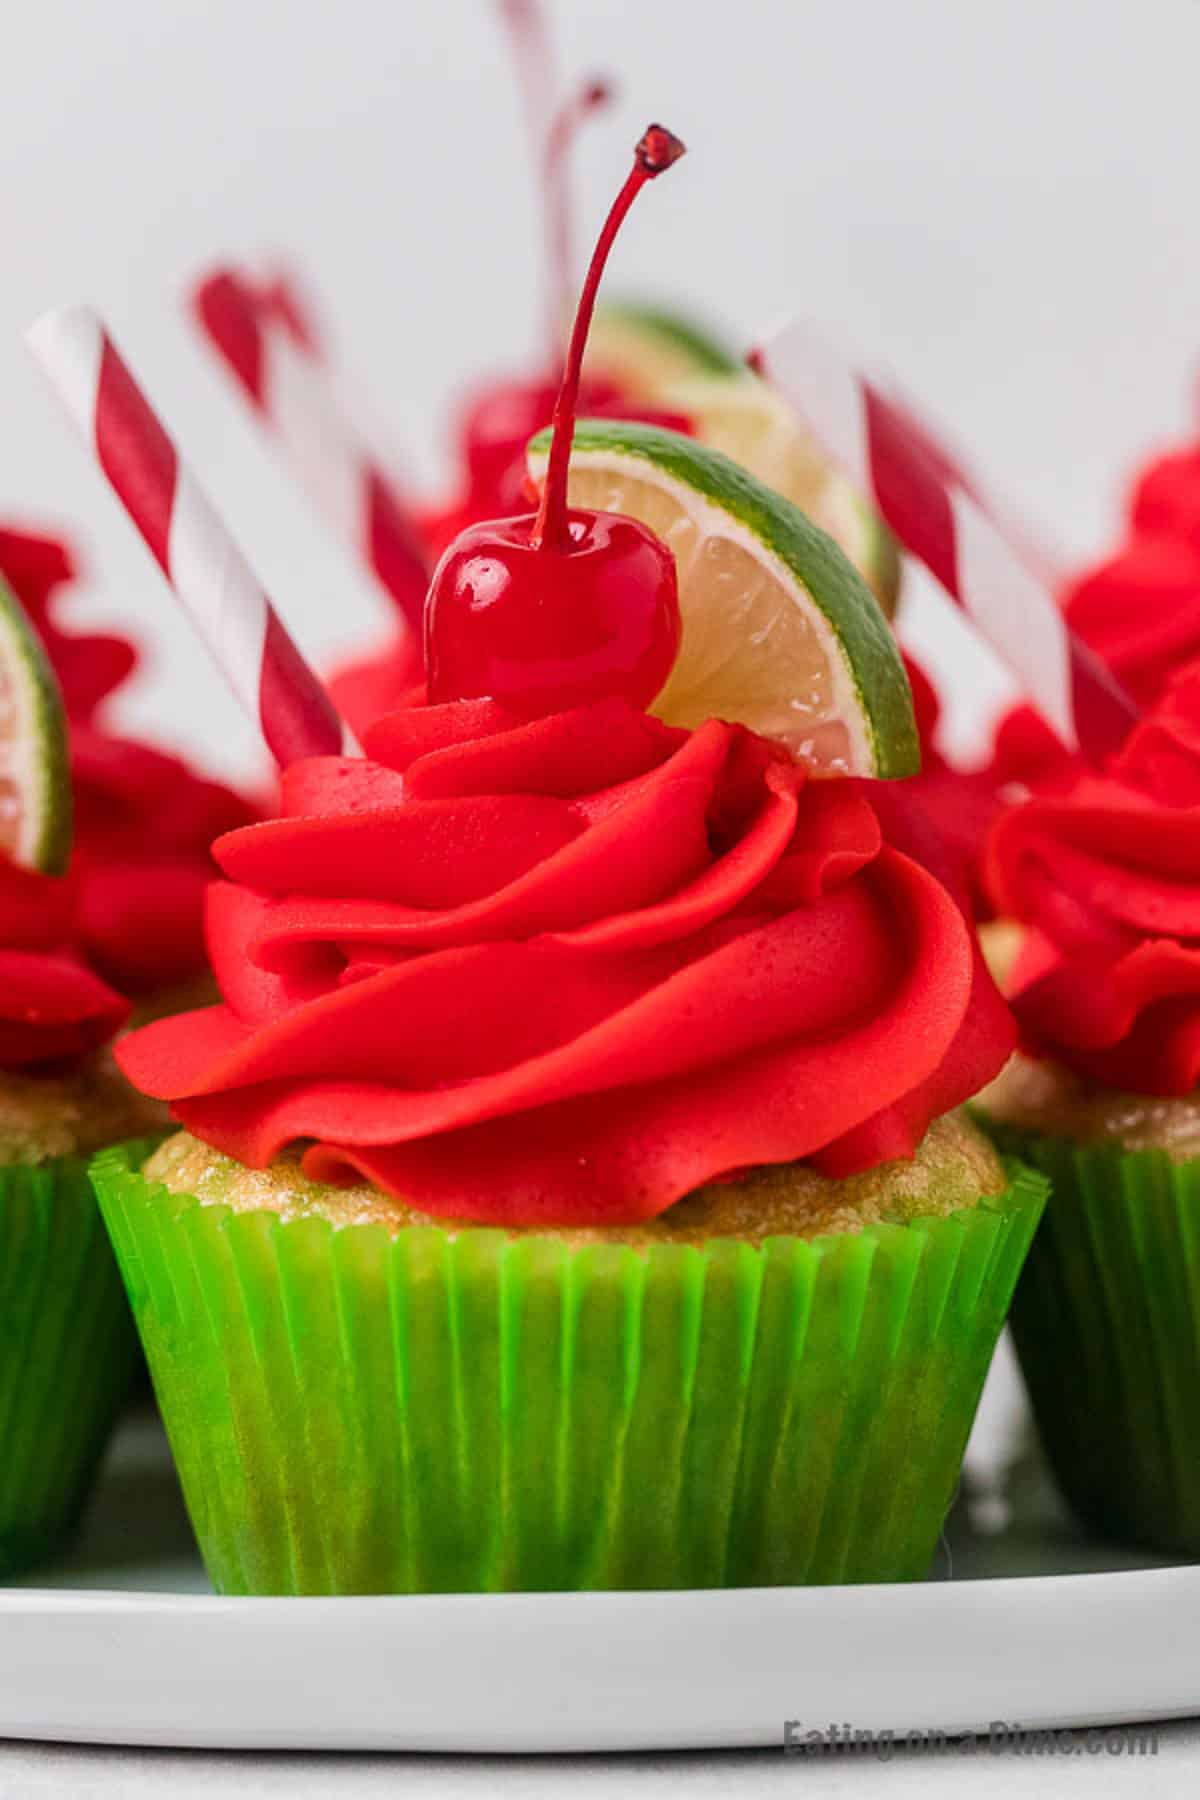 Closeup picture of cherry limeade cupcake in a green cupcake liner